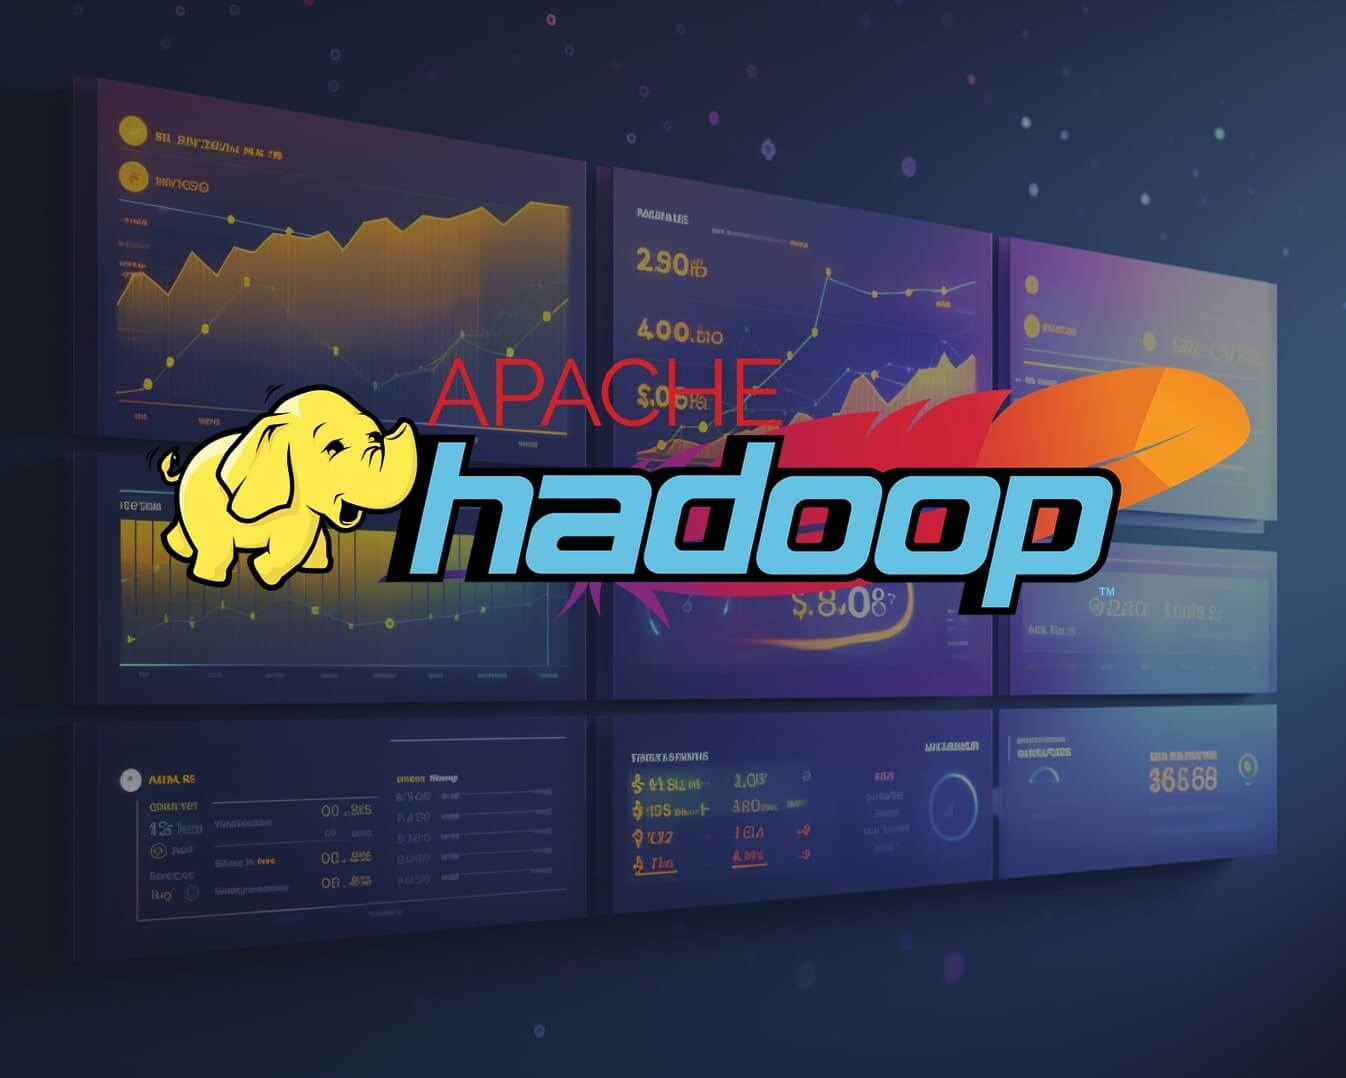 The logo for Apache Hadoop, a business intelligence tool for big data processing, displayed on a screen.